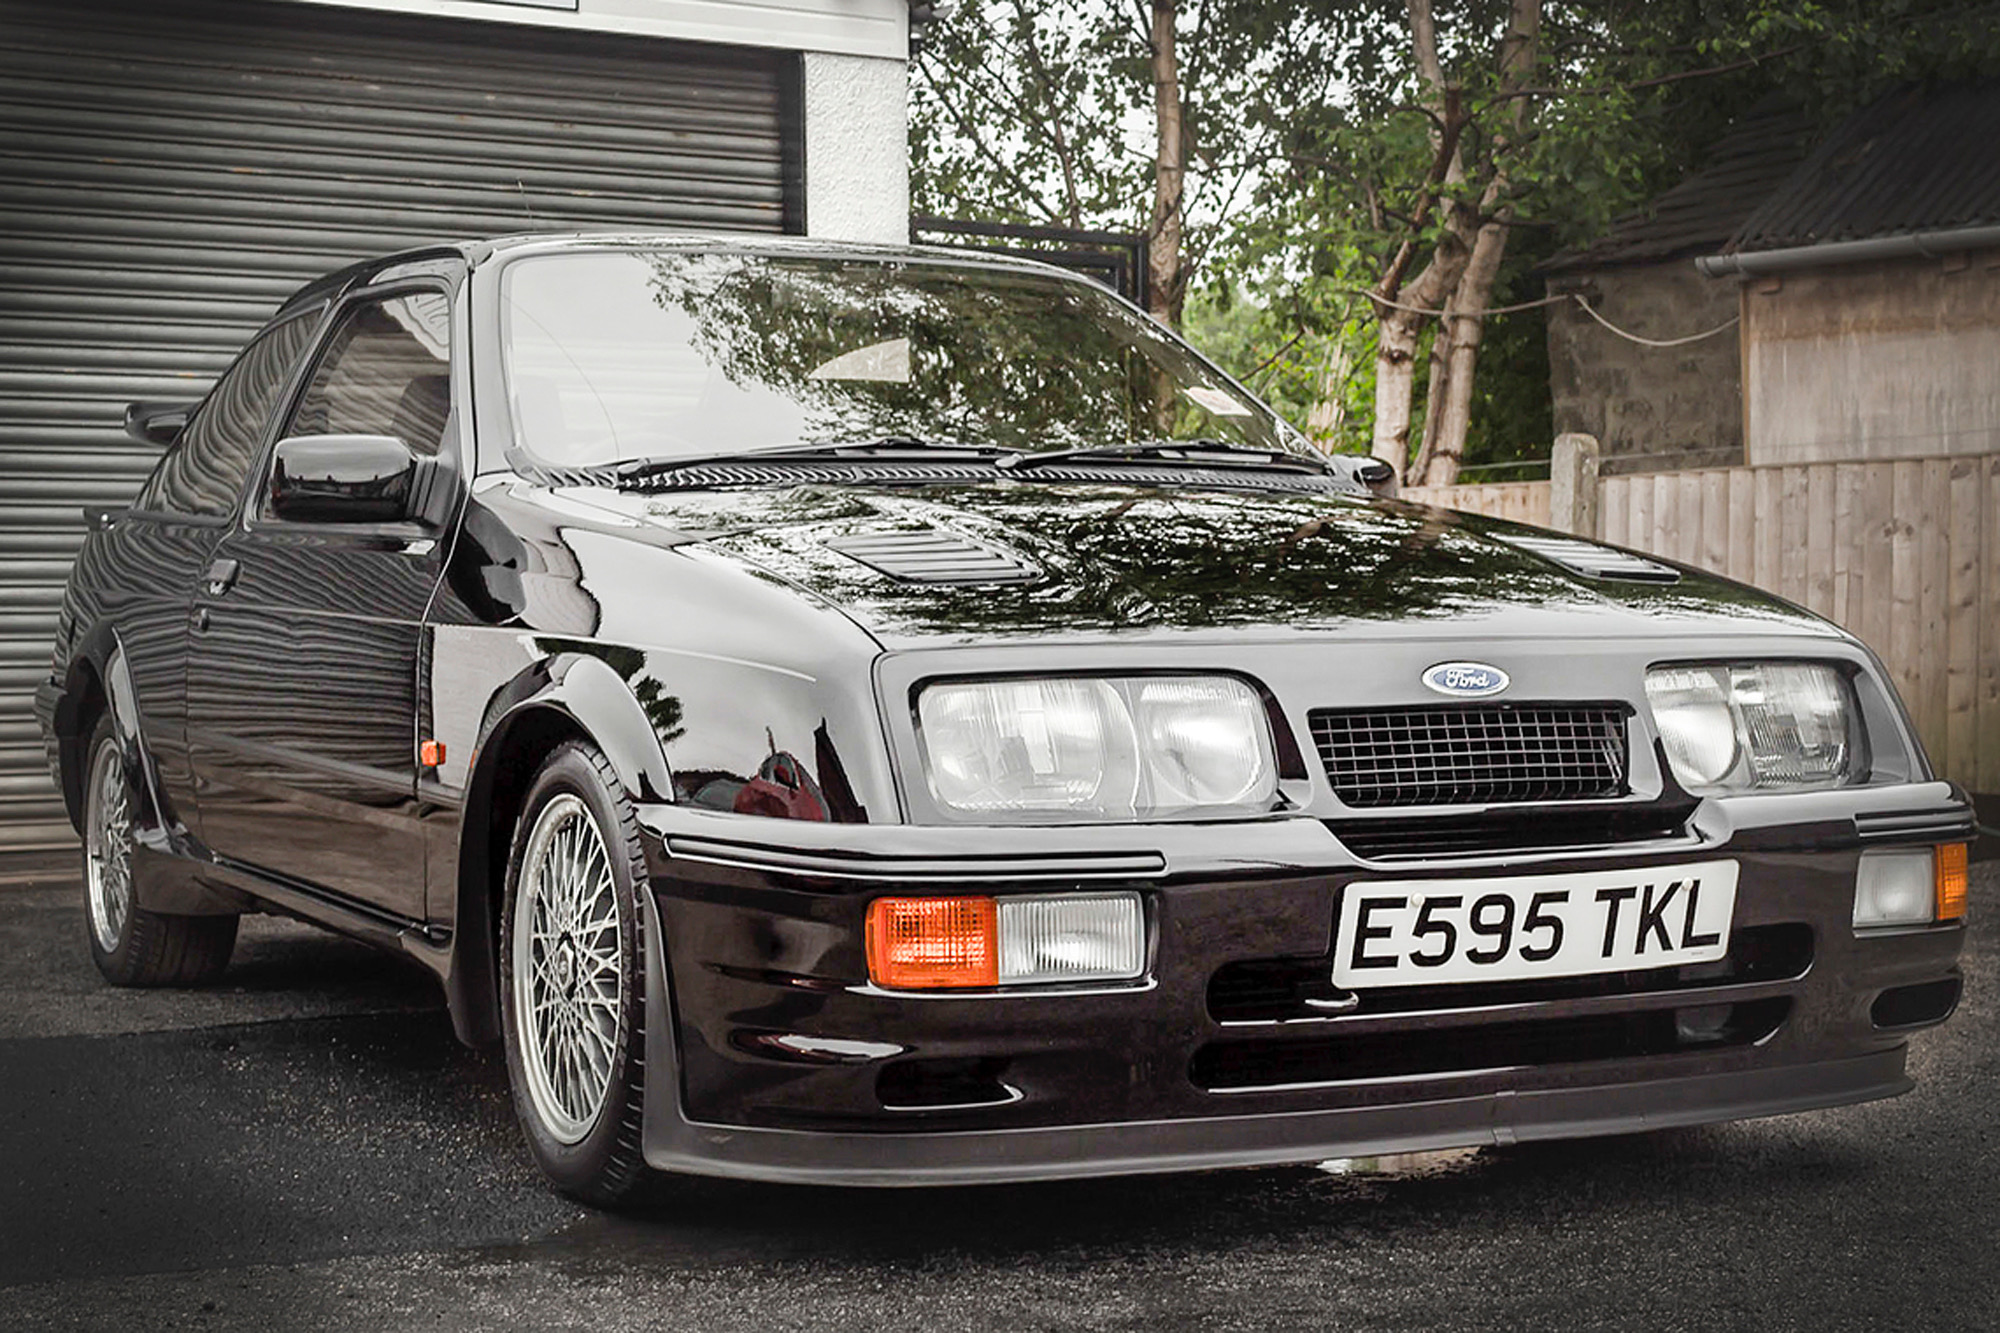 Ford Sierra Cosworth among low-mileage vehicles on auction docket | Silverstone Auctions photos